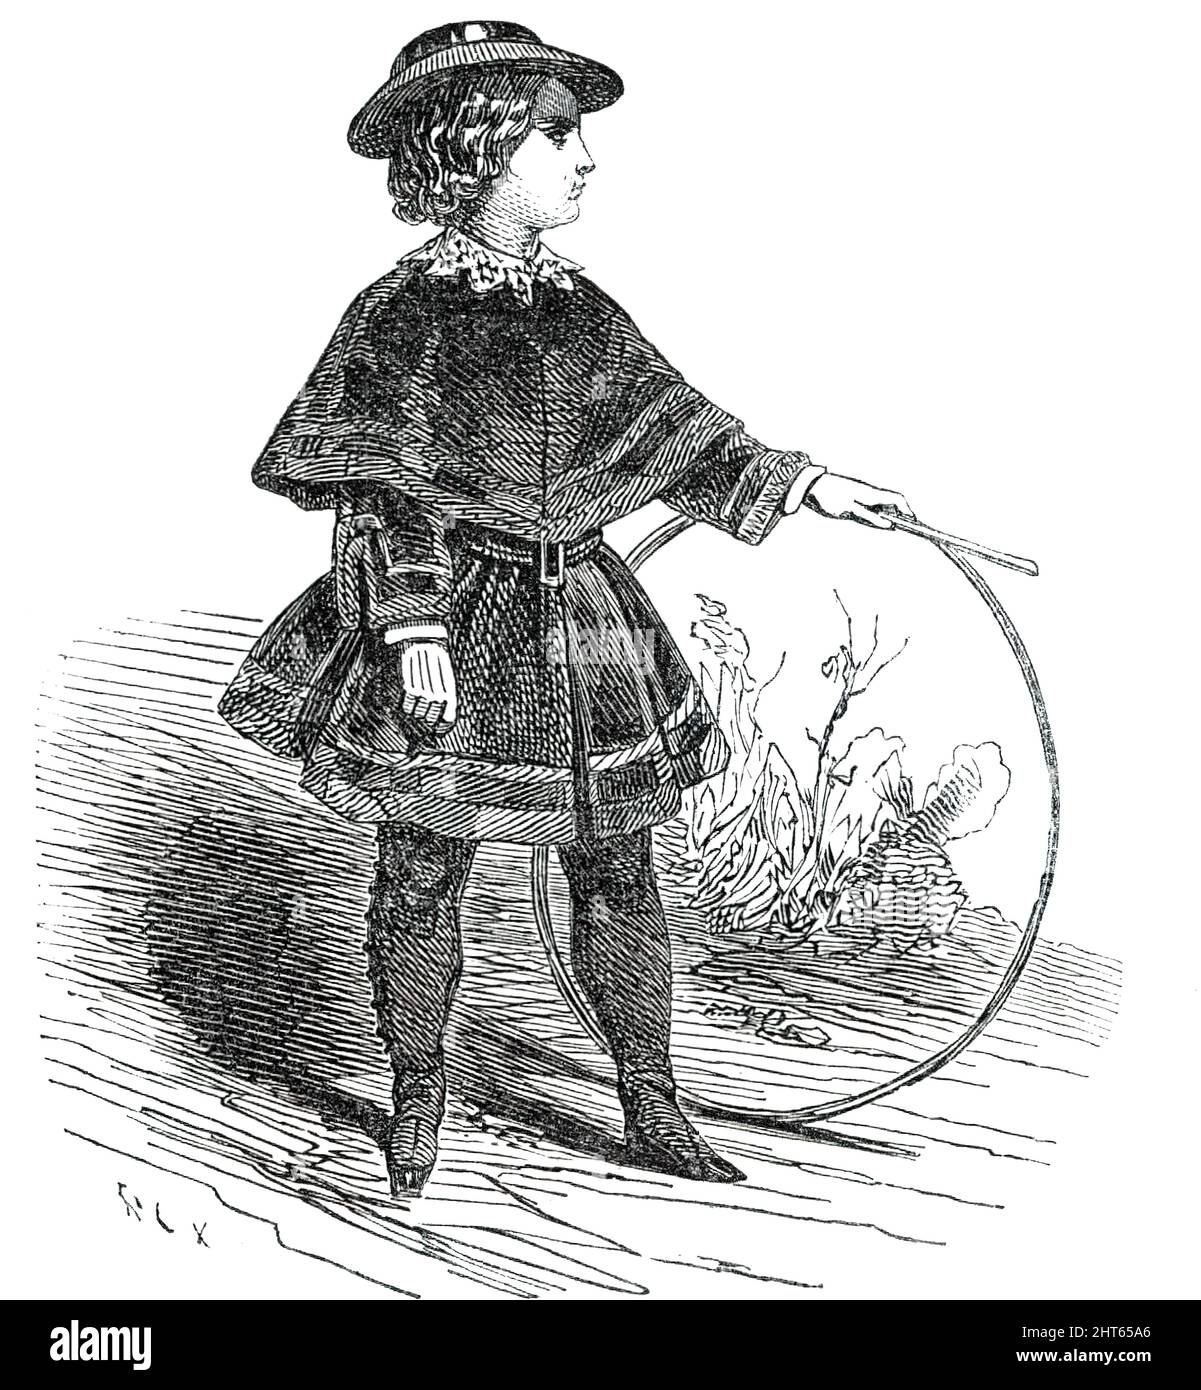 Paris Fashions for the New Year, 1850. 'Boys' Dress, of dark-coloured cloth or velvet, trimmed with a small braid down the edges, with gaiters similar to the dress, or drab only.' From &quot;Illustrated London News&quot;, 1850. Stock Photo